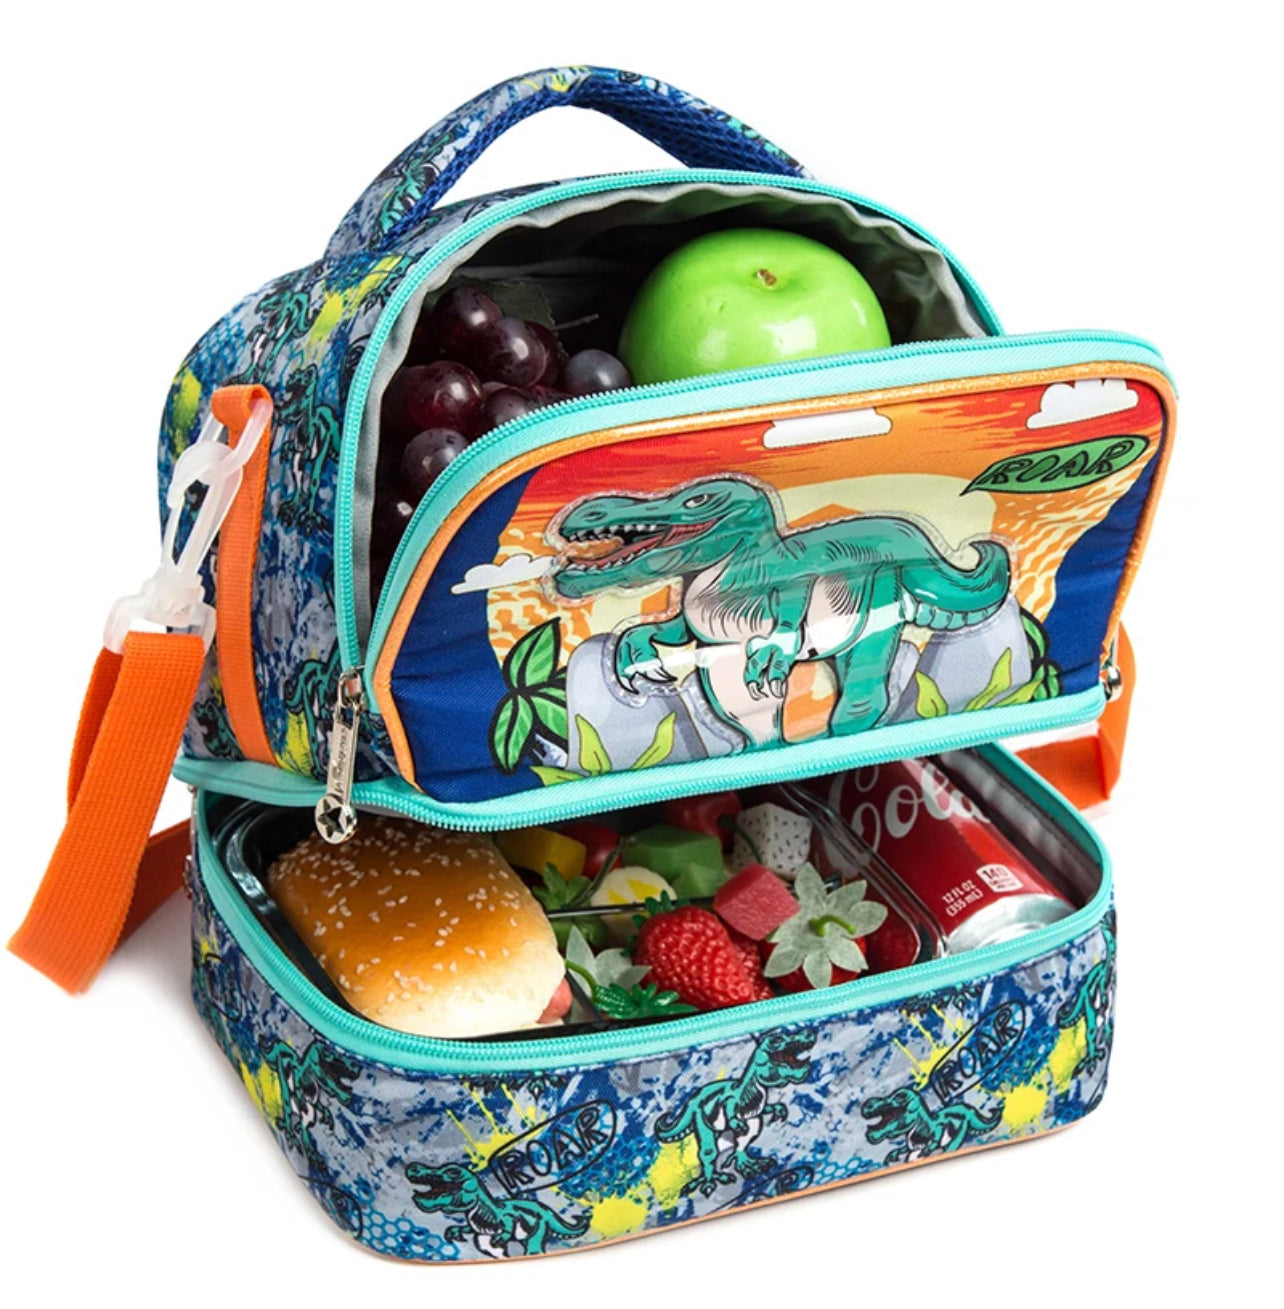 Luxury Insulated Lunch Bag - Two Big Compartments